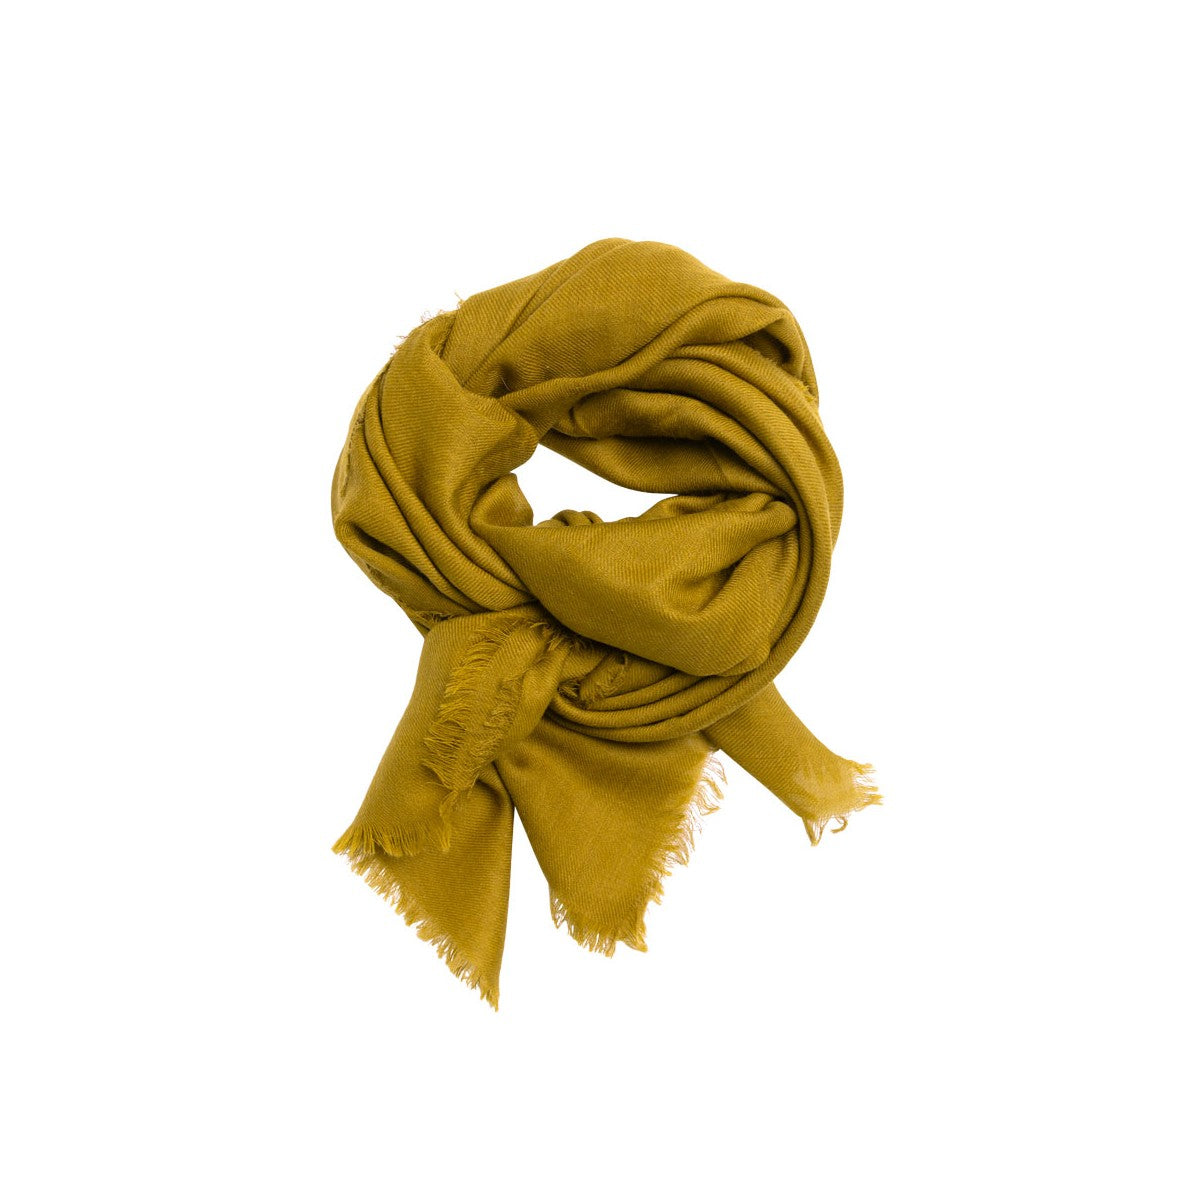 Wool silk scarf in different colors